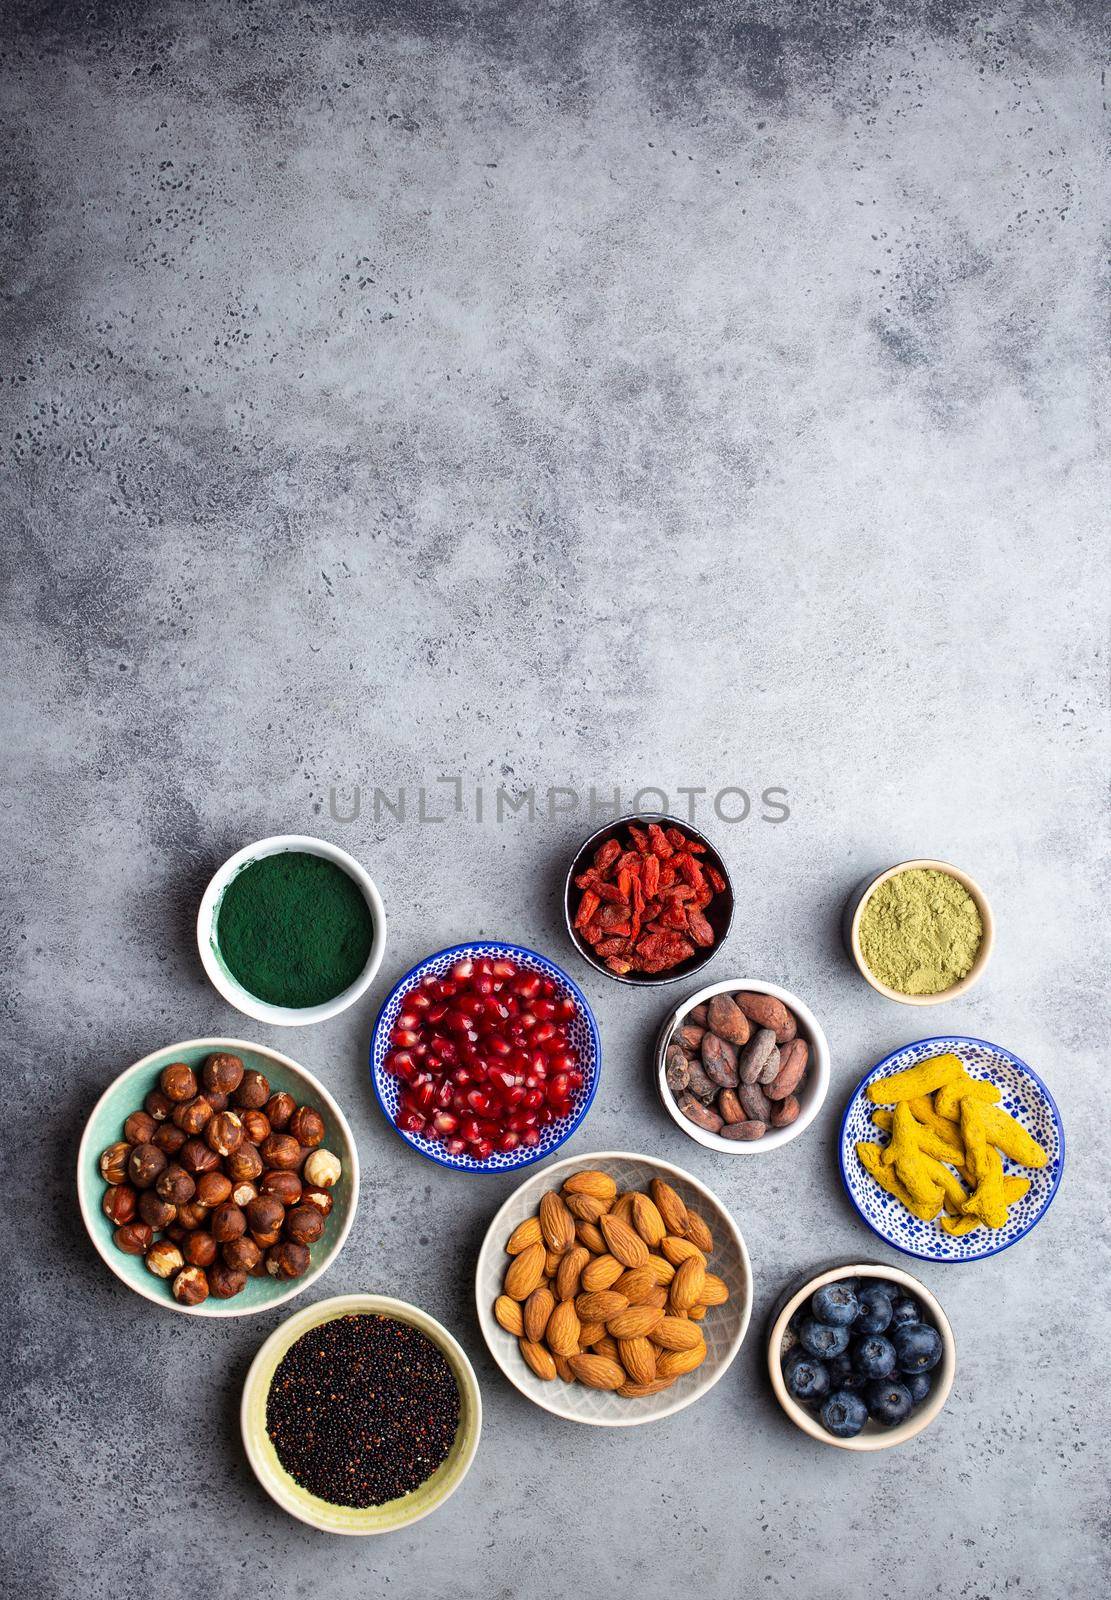 Set of different superfoods in bowls on stone gray background: spirulina, goji berry, cocoa, matcha green tea, quinoa, chia seeds, blueberries, nuts for happy healthy living, top view, copy space